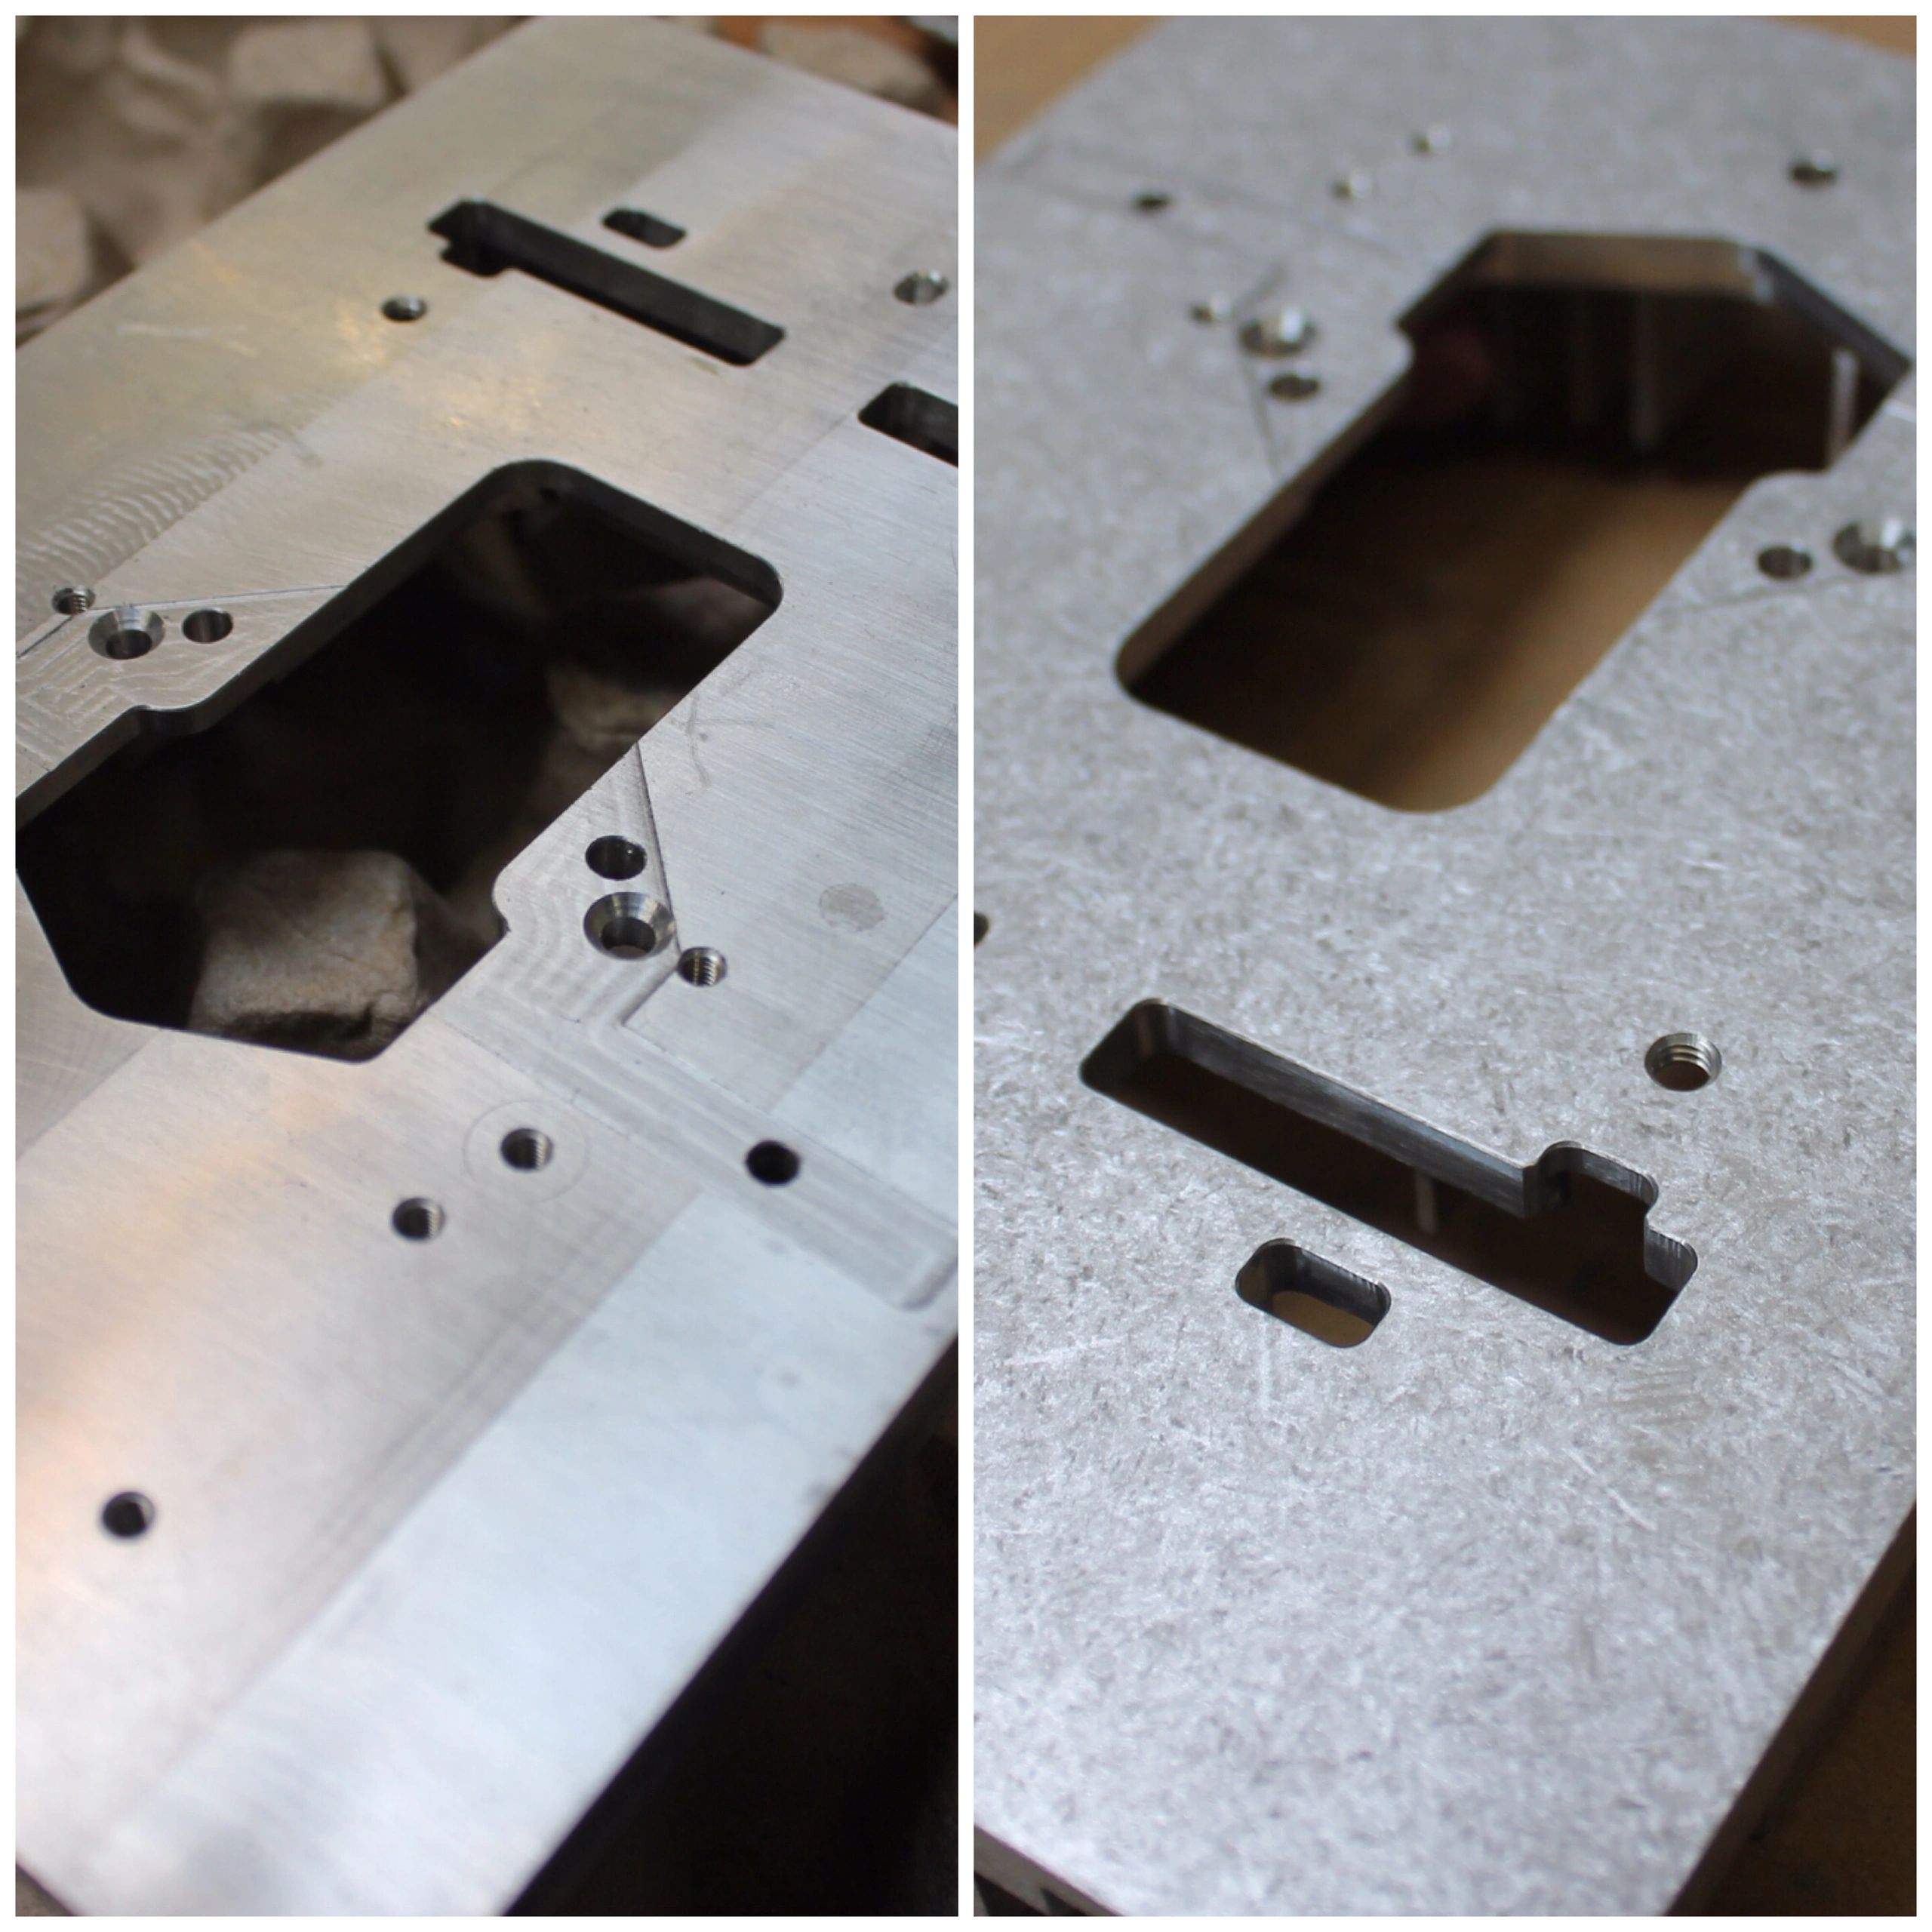 Before and After picture of a part that has gone through the tumbling process